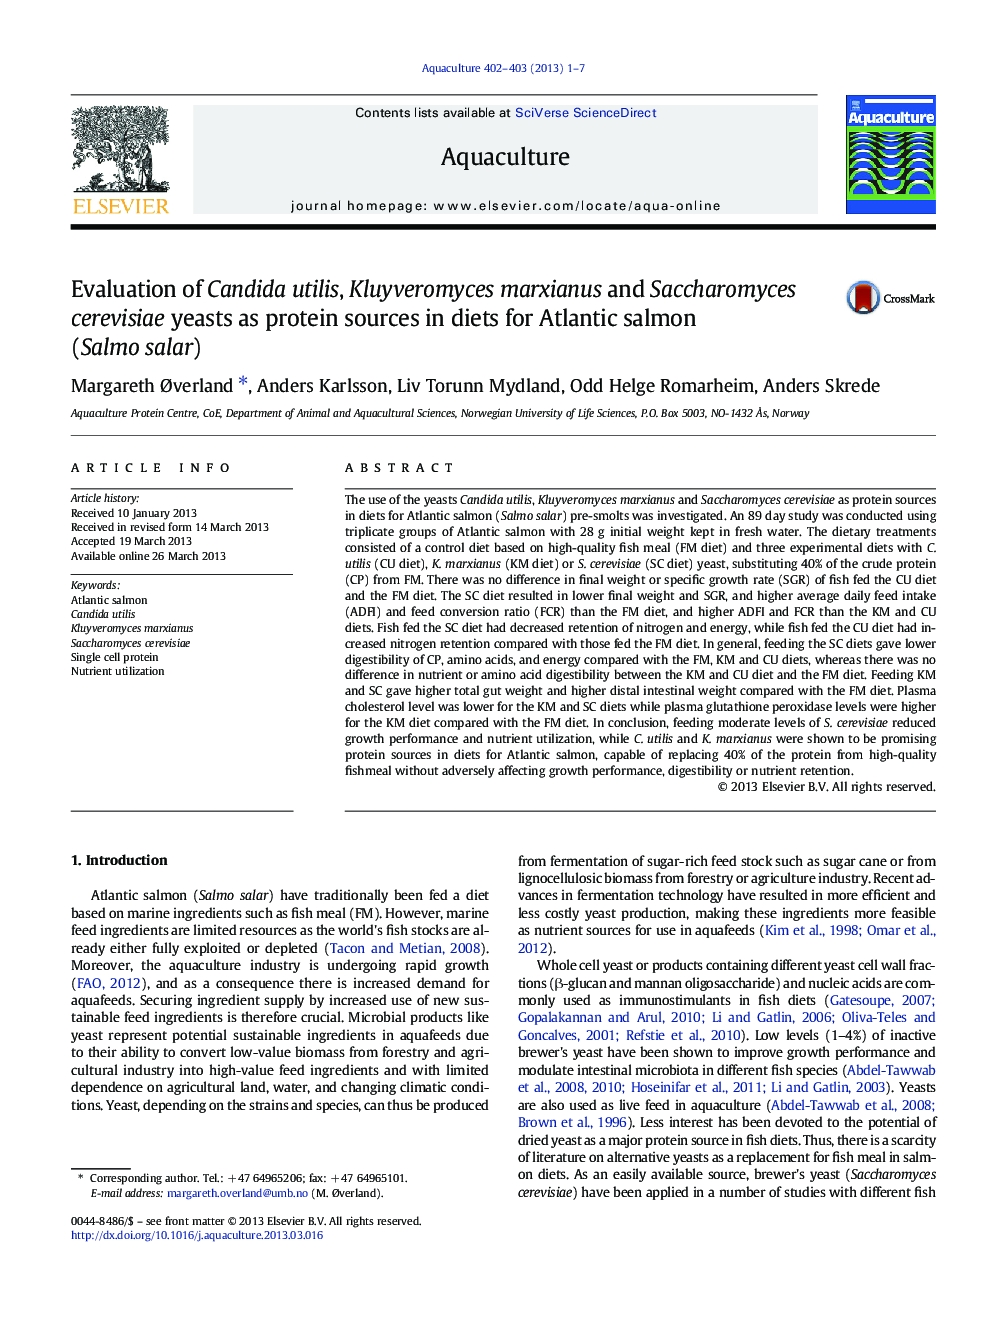 Evaluation of Candida utilis, Kluyveromyces marxianus and Saccharomyces cerevisiae yeasts as protein sources in diets for Atlantic salmon (Salmo salar)